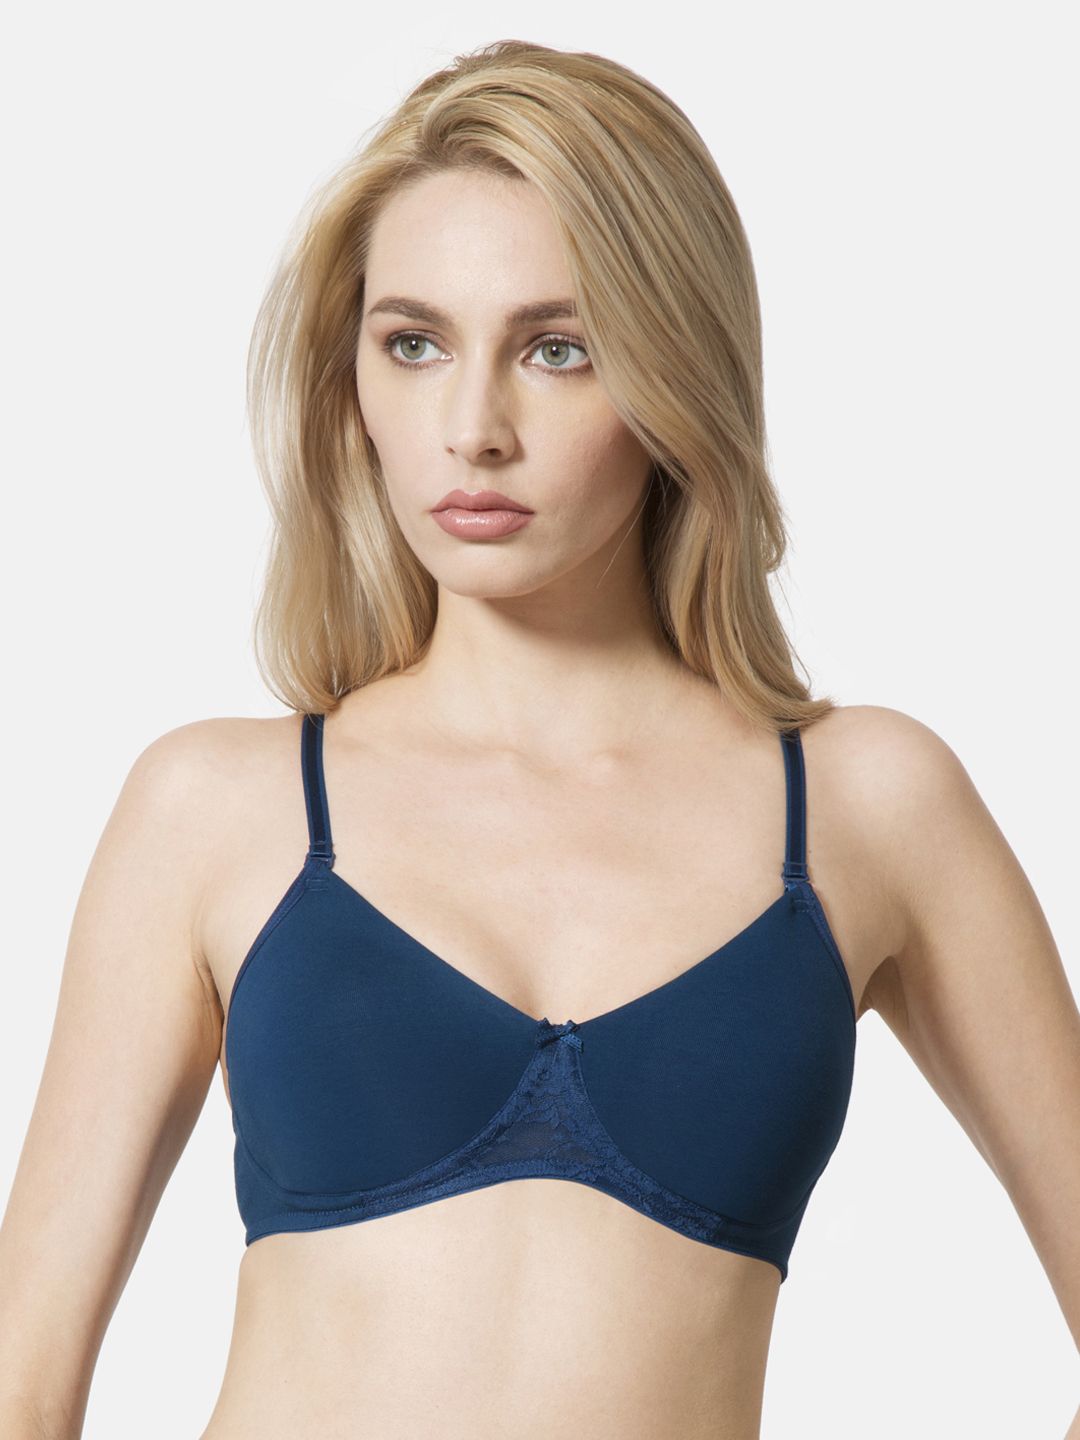 Van Heusen Blue Solid Non-Wired Non Padded Seamless Shaper Bra ILIBR1CSSWW611001 Price in India